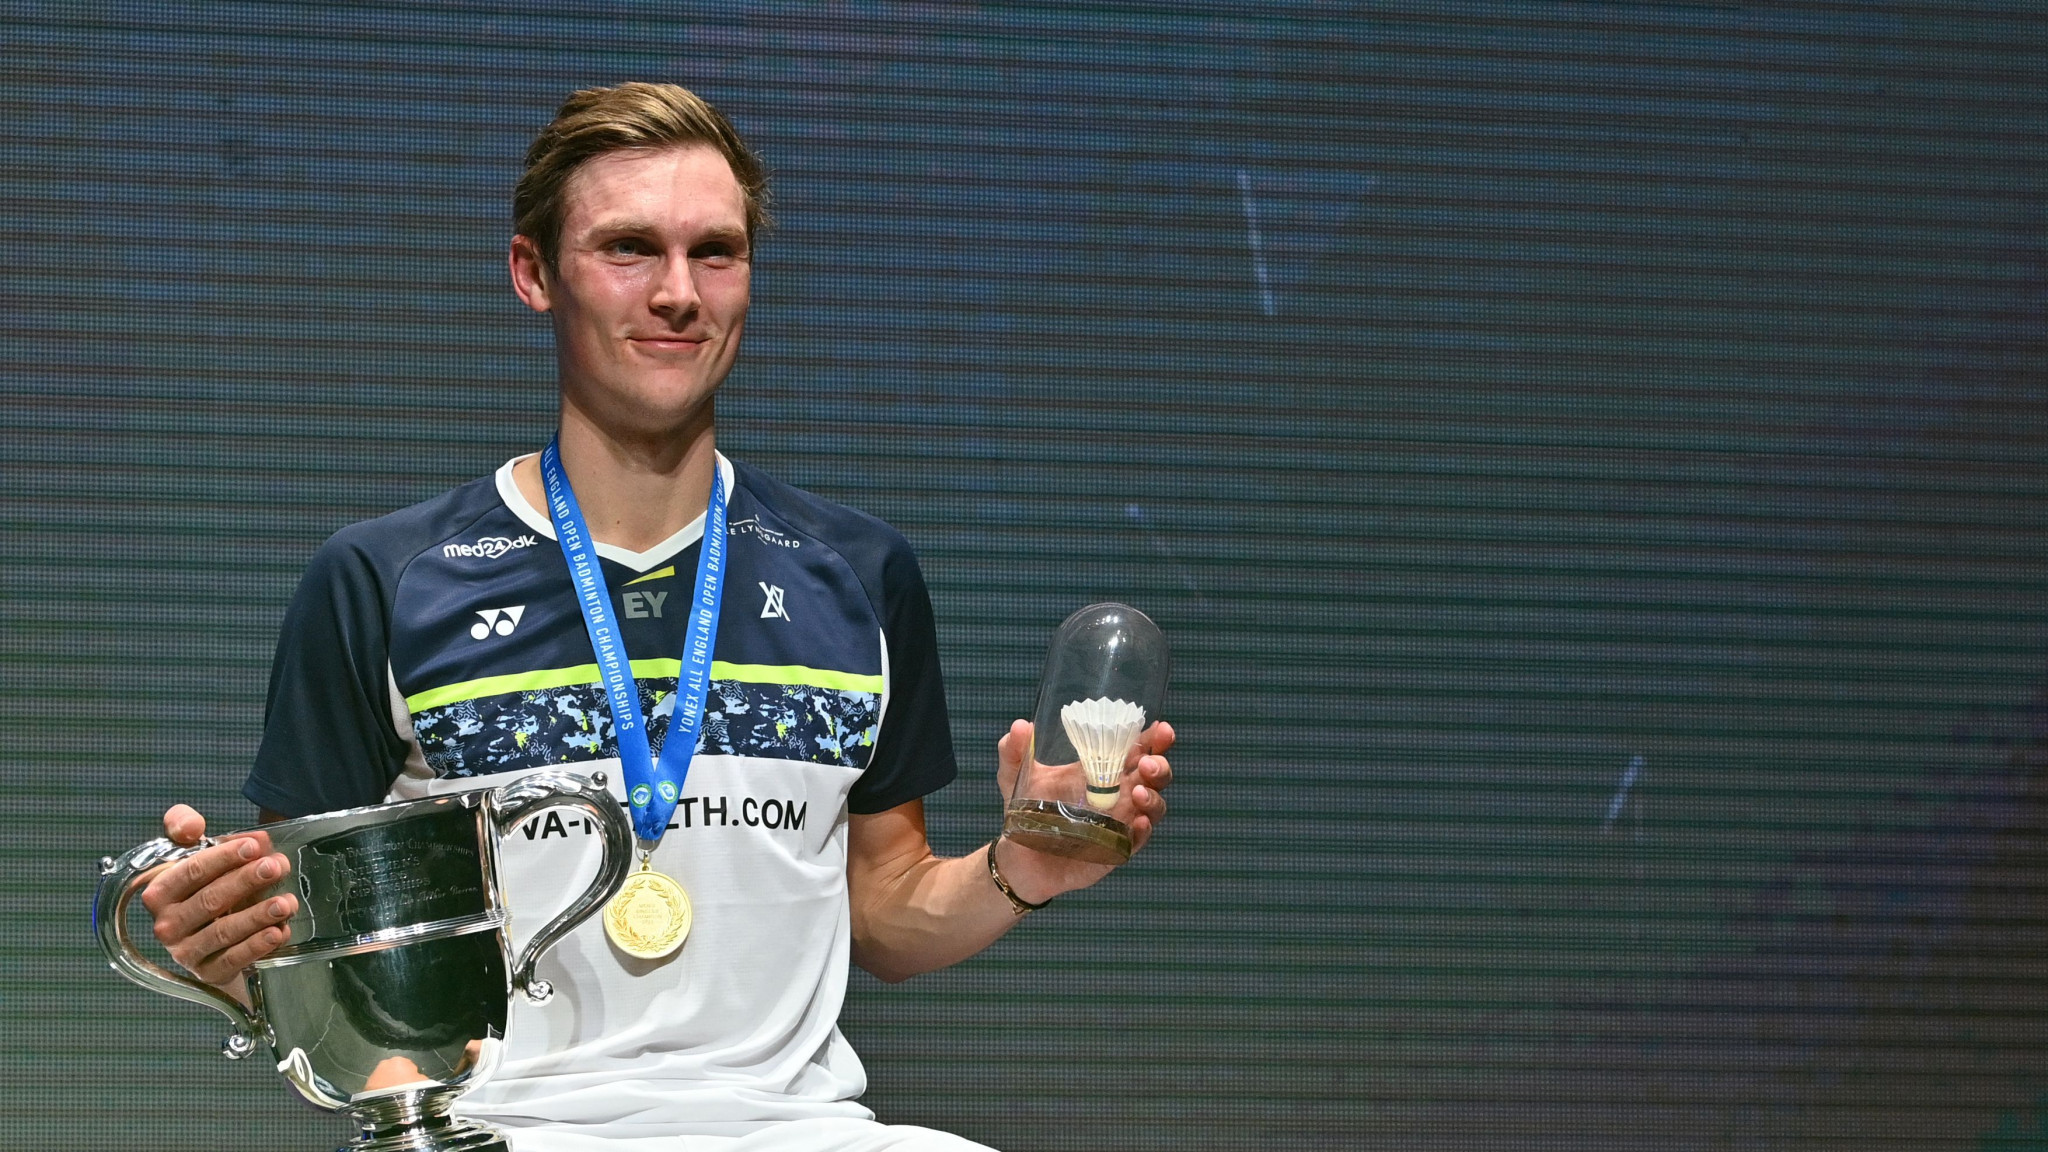 Olympic and world champion Viktor Axelsen of Denmark is set to defend his title at the All England Open ©Getty Images